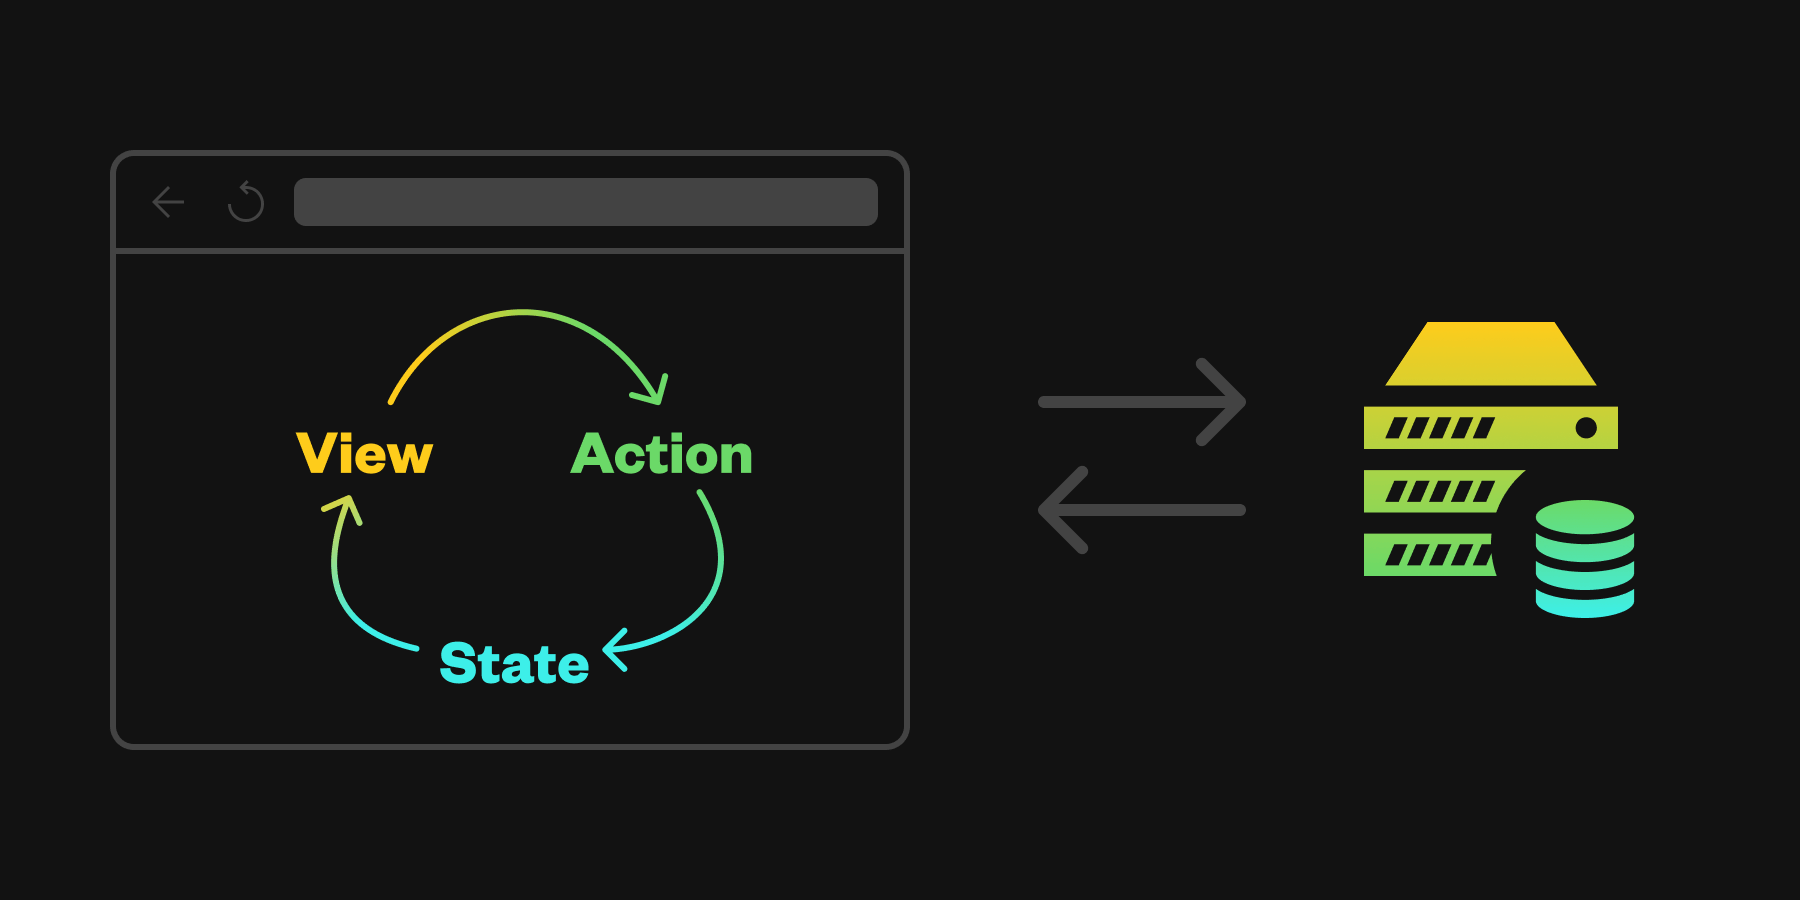 Illustration of the flow “View -> Action -> State” framed in a browser on the left. On the right is an illustartion of a server with a database. Two arrows connect these two illustrations denoting network transfer.